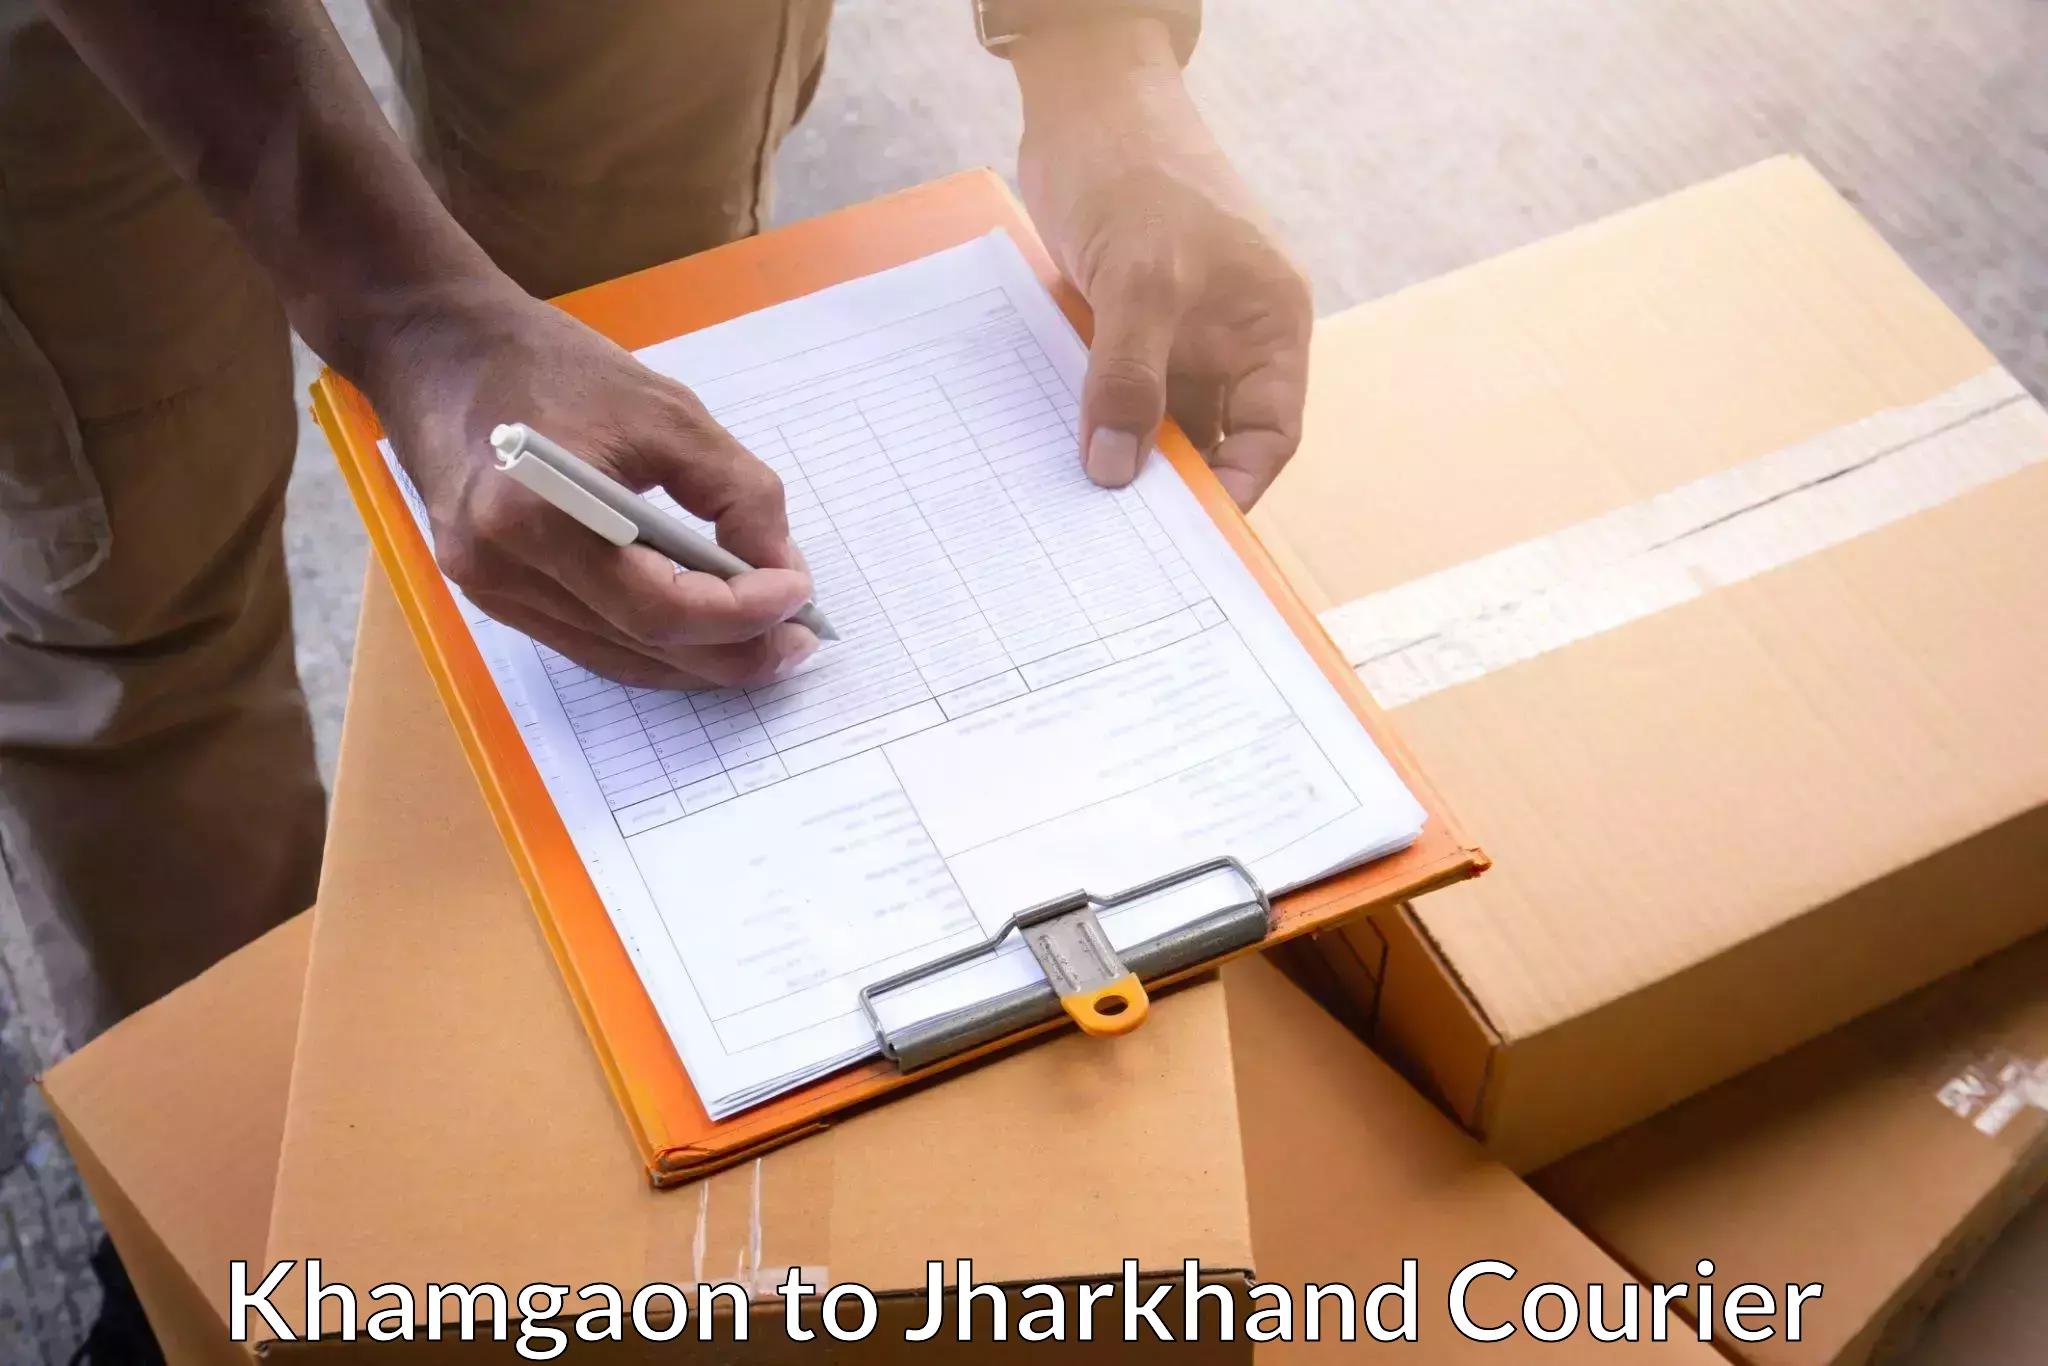 Same-day delivery solutions Khamgaon to Koderma